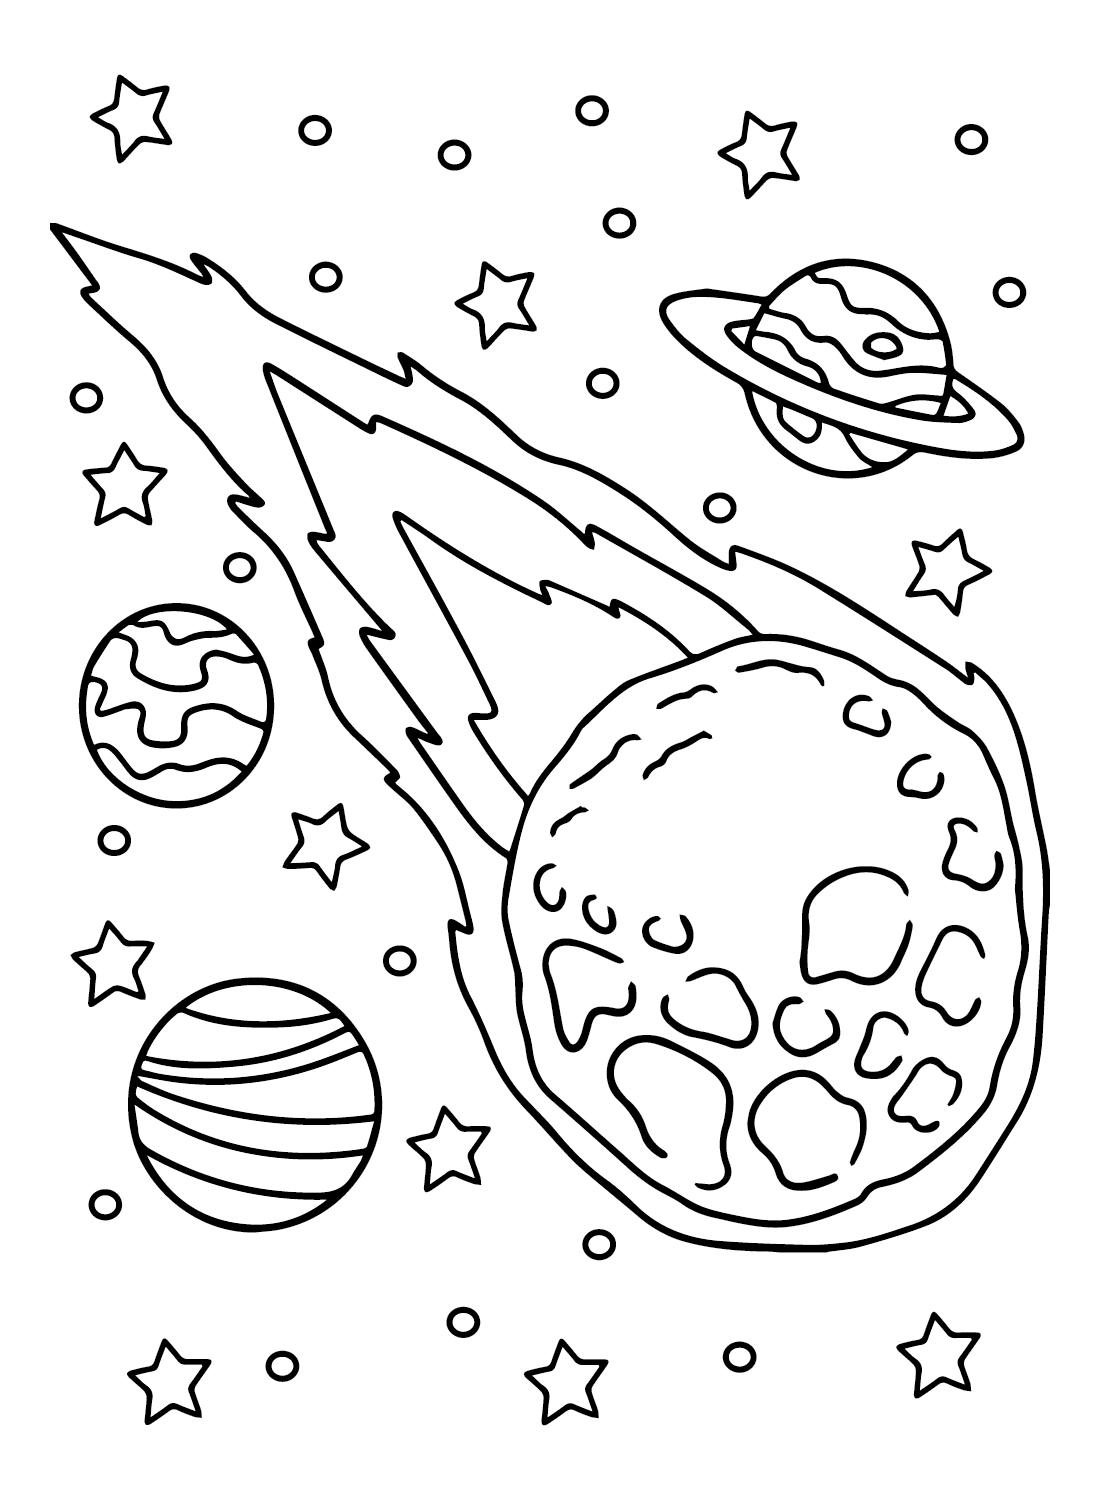 Doodle Asteroid from Asteroid